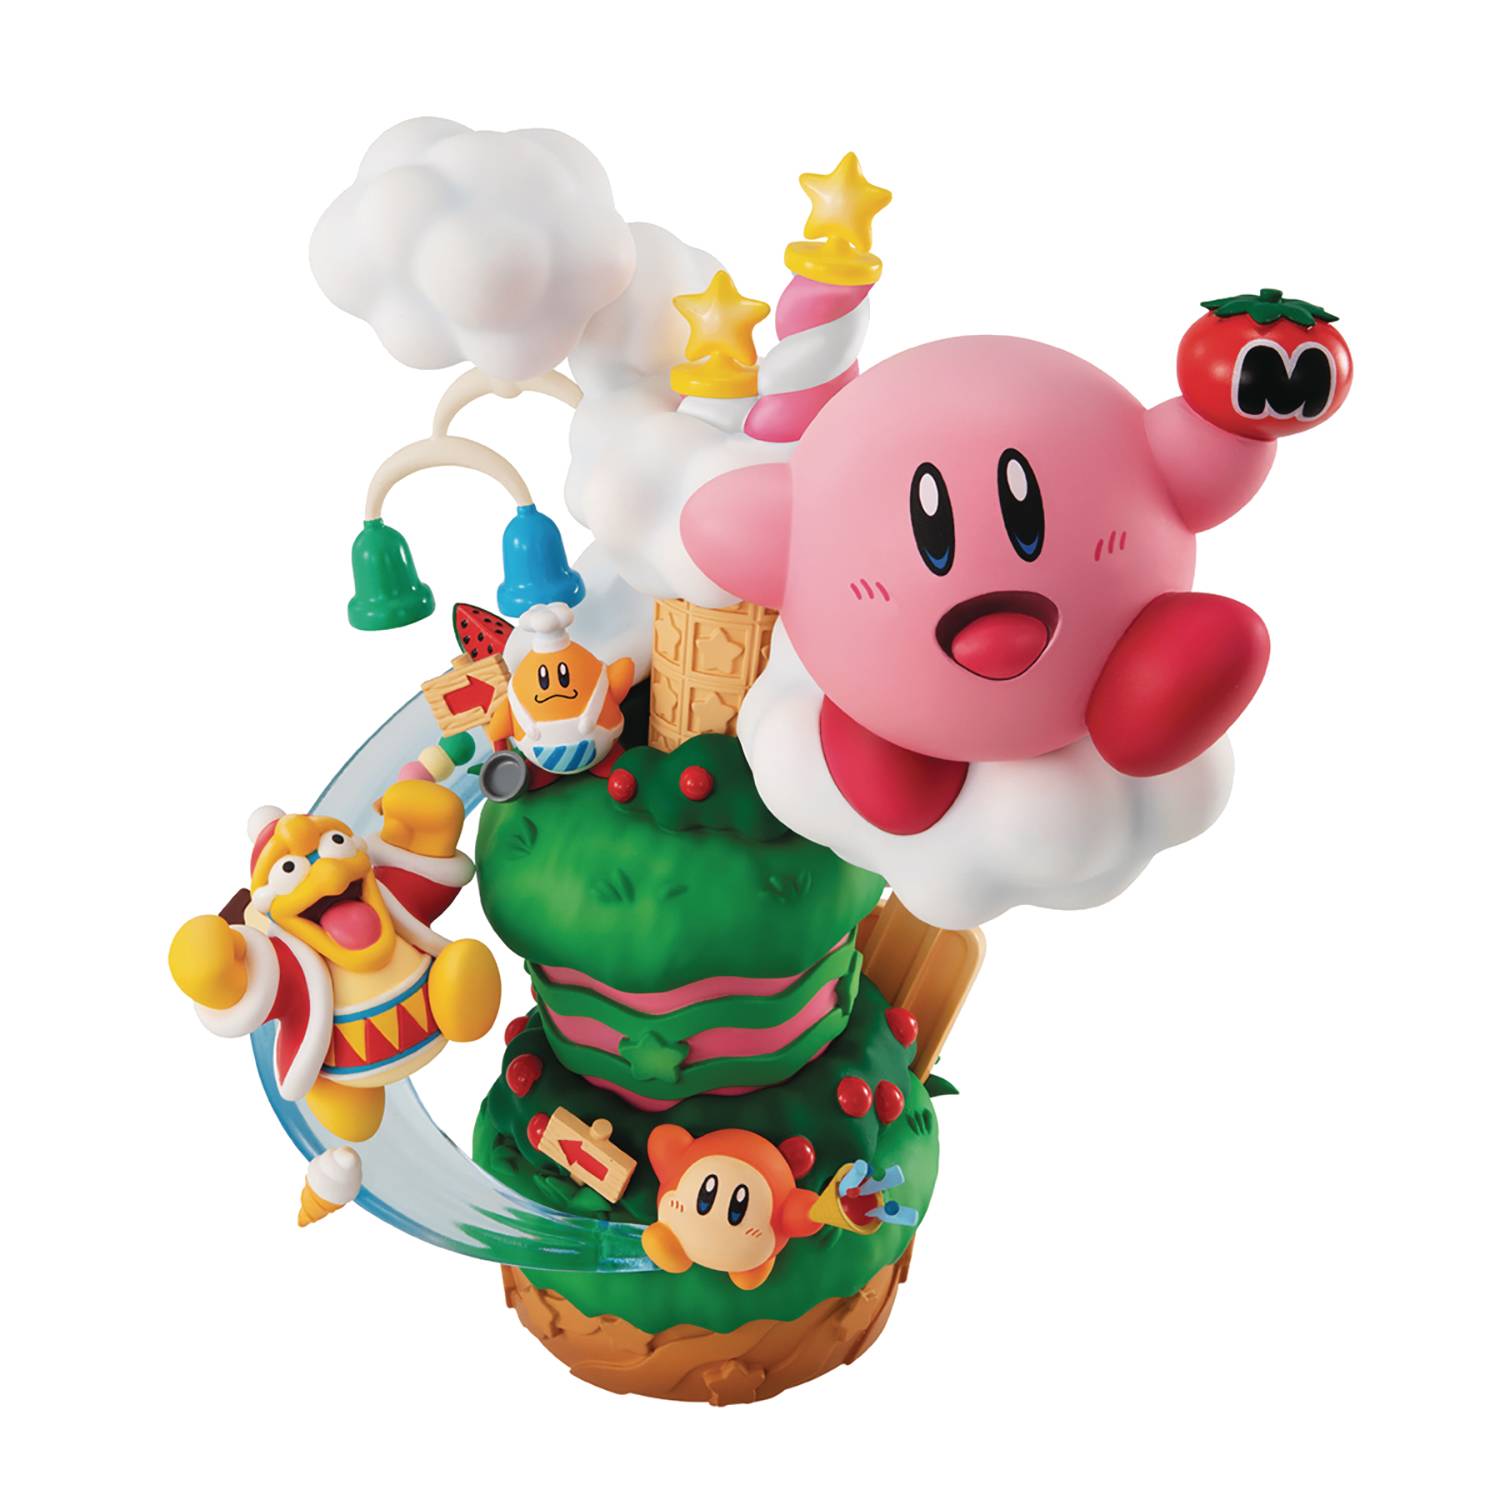 Xtarlin Kirby Super Star 2.5 Kirby Action Figure with Wings PVC